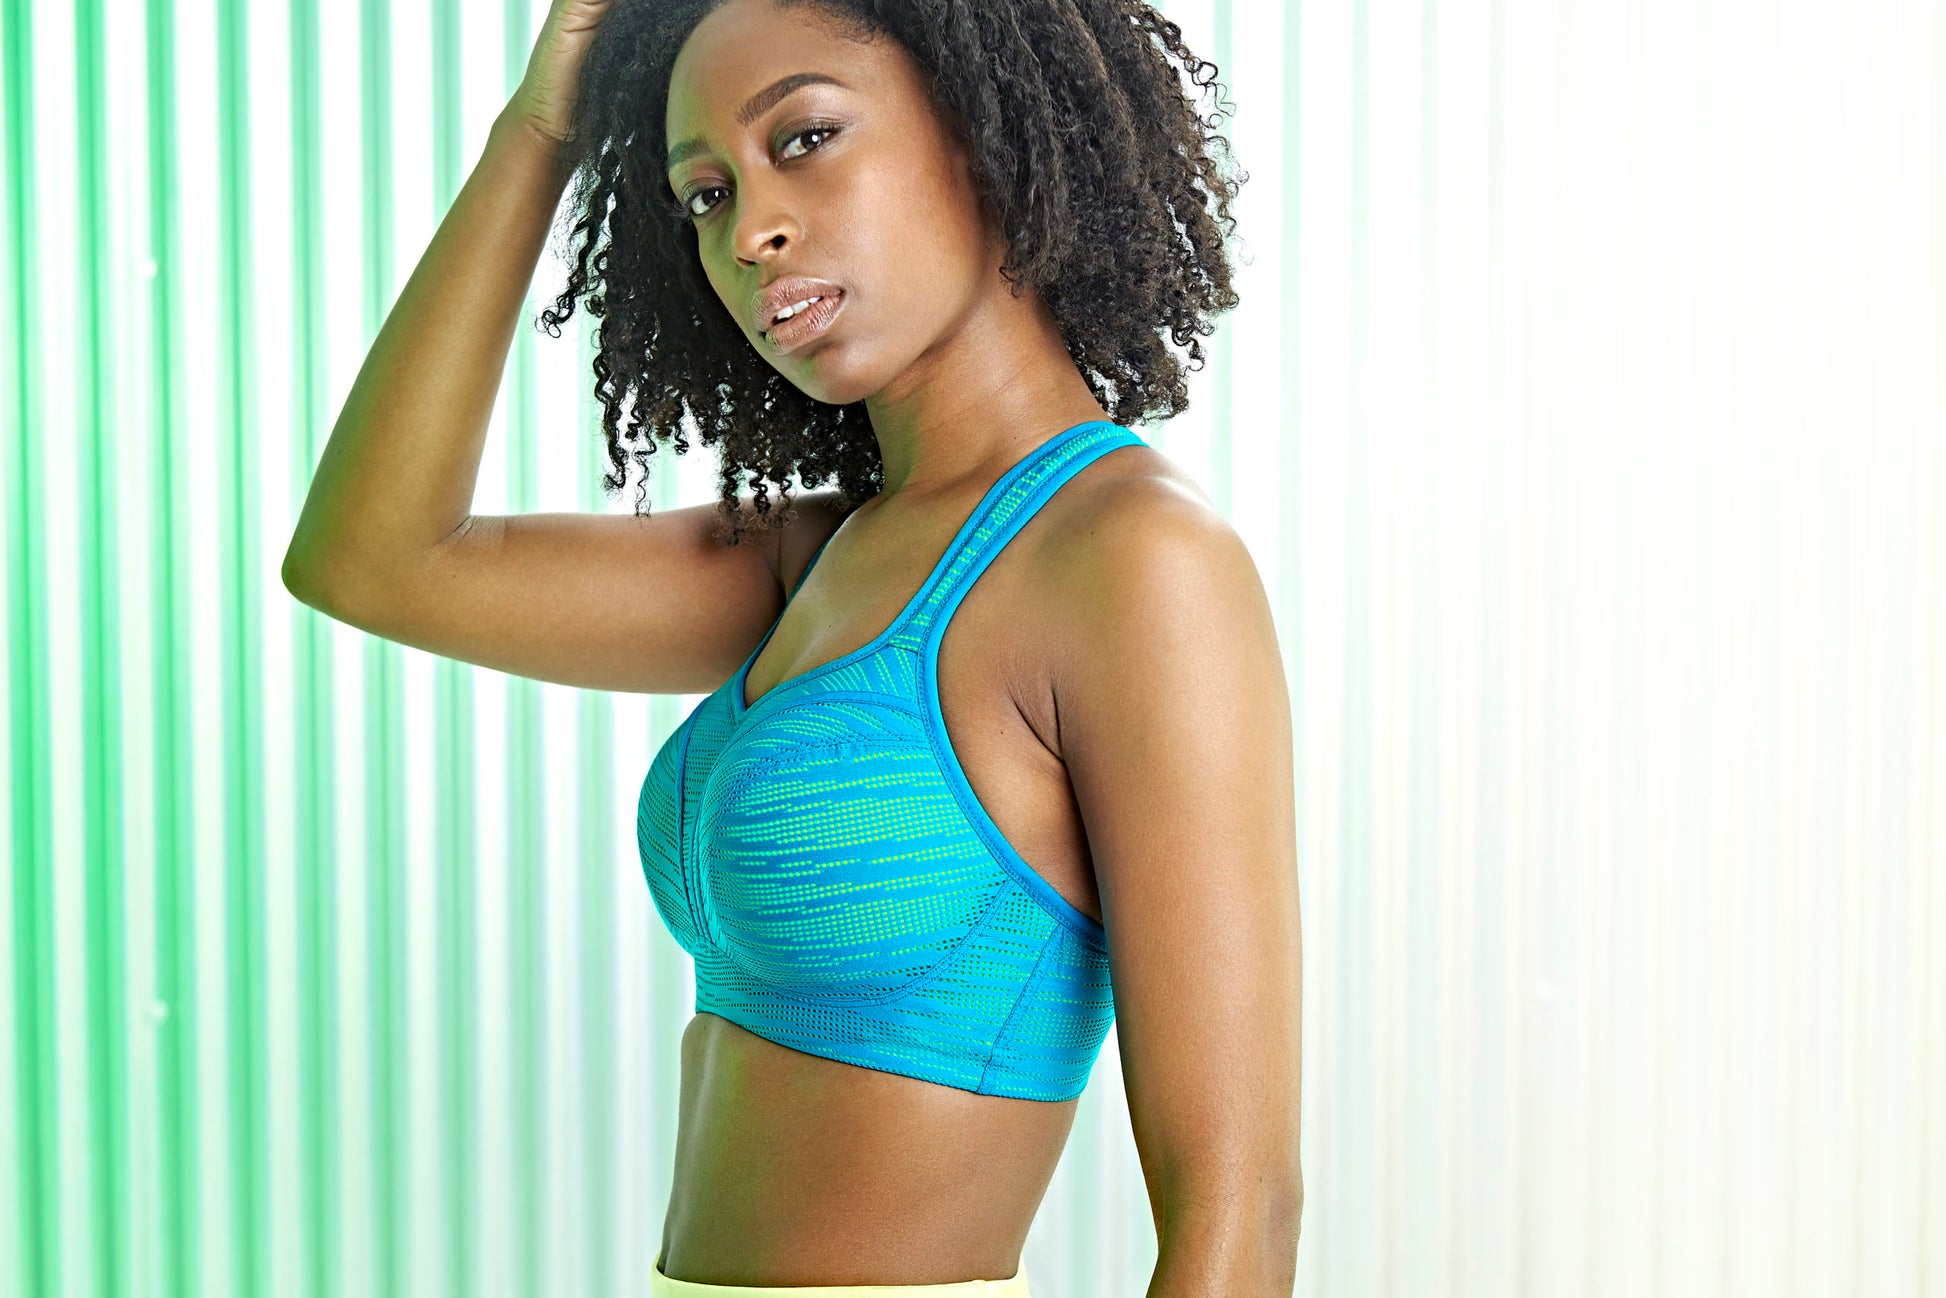 Panache Wired Sports Bra - Teal/Lime Mix worn by model lifestyle image